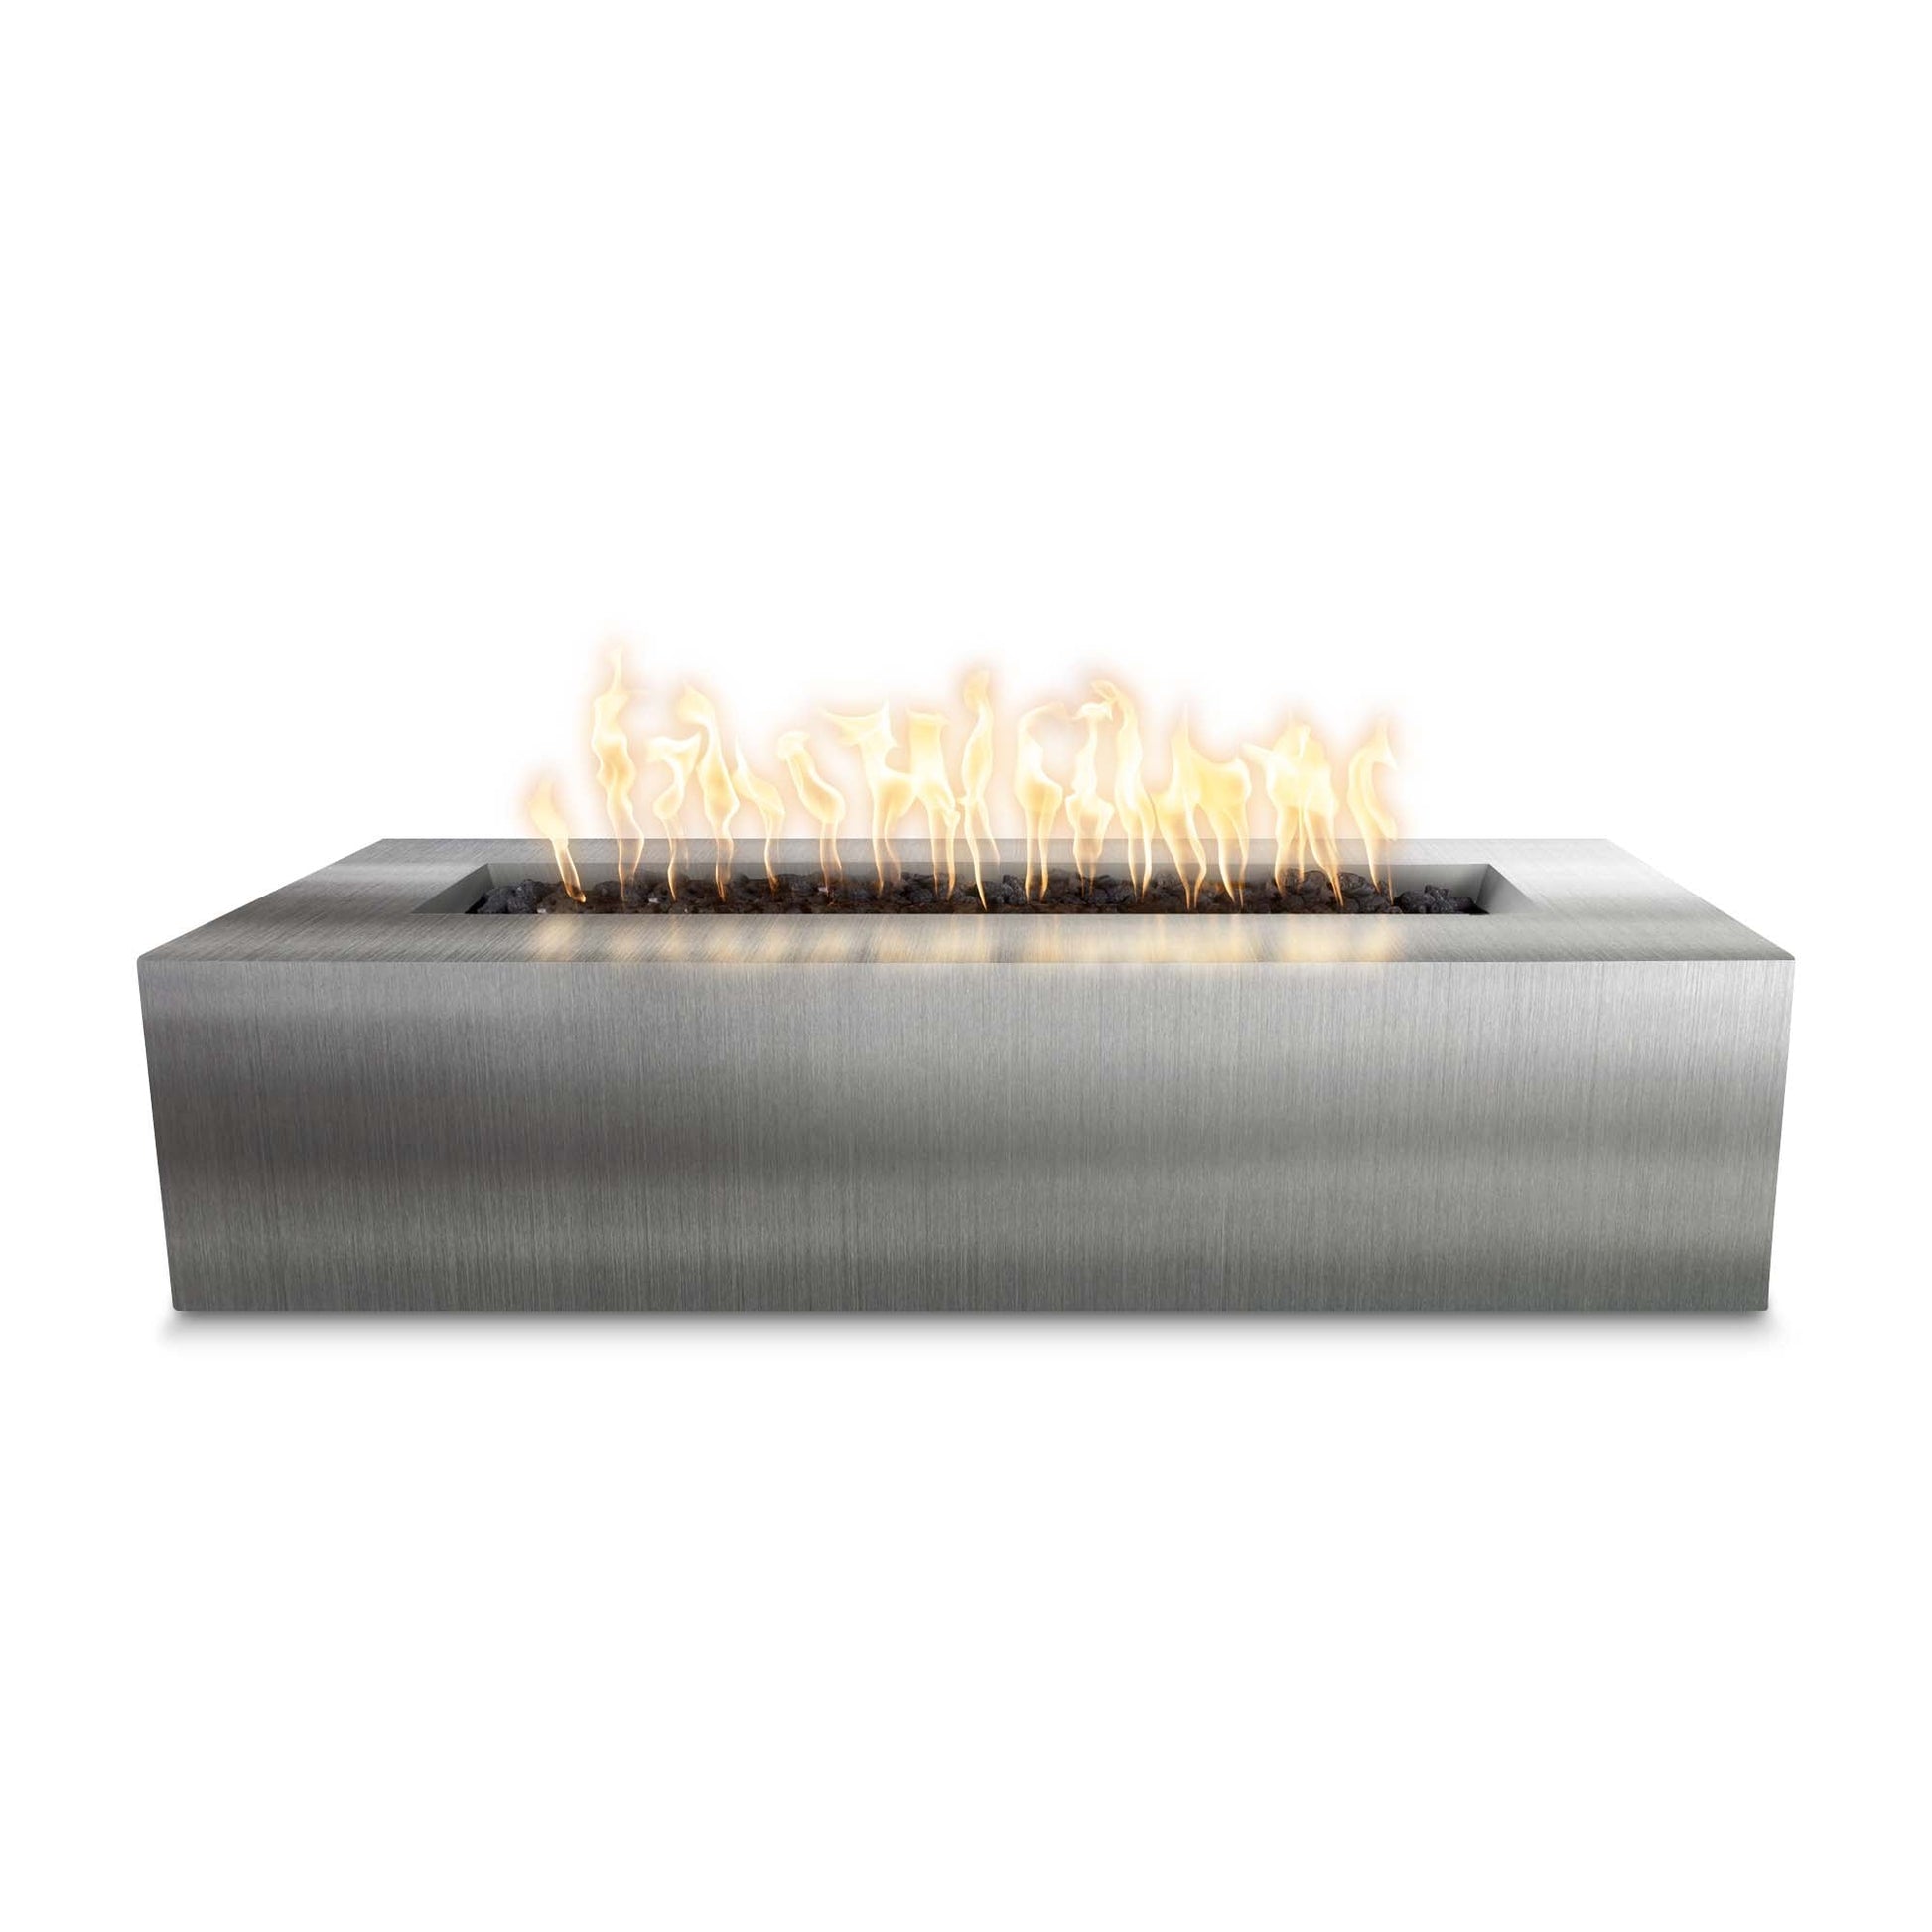 The Outdoor Plus Rectangular Regal 54" Hammered Copper Natural Gas Fire Pit with 12V Electronic Ignition